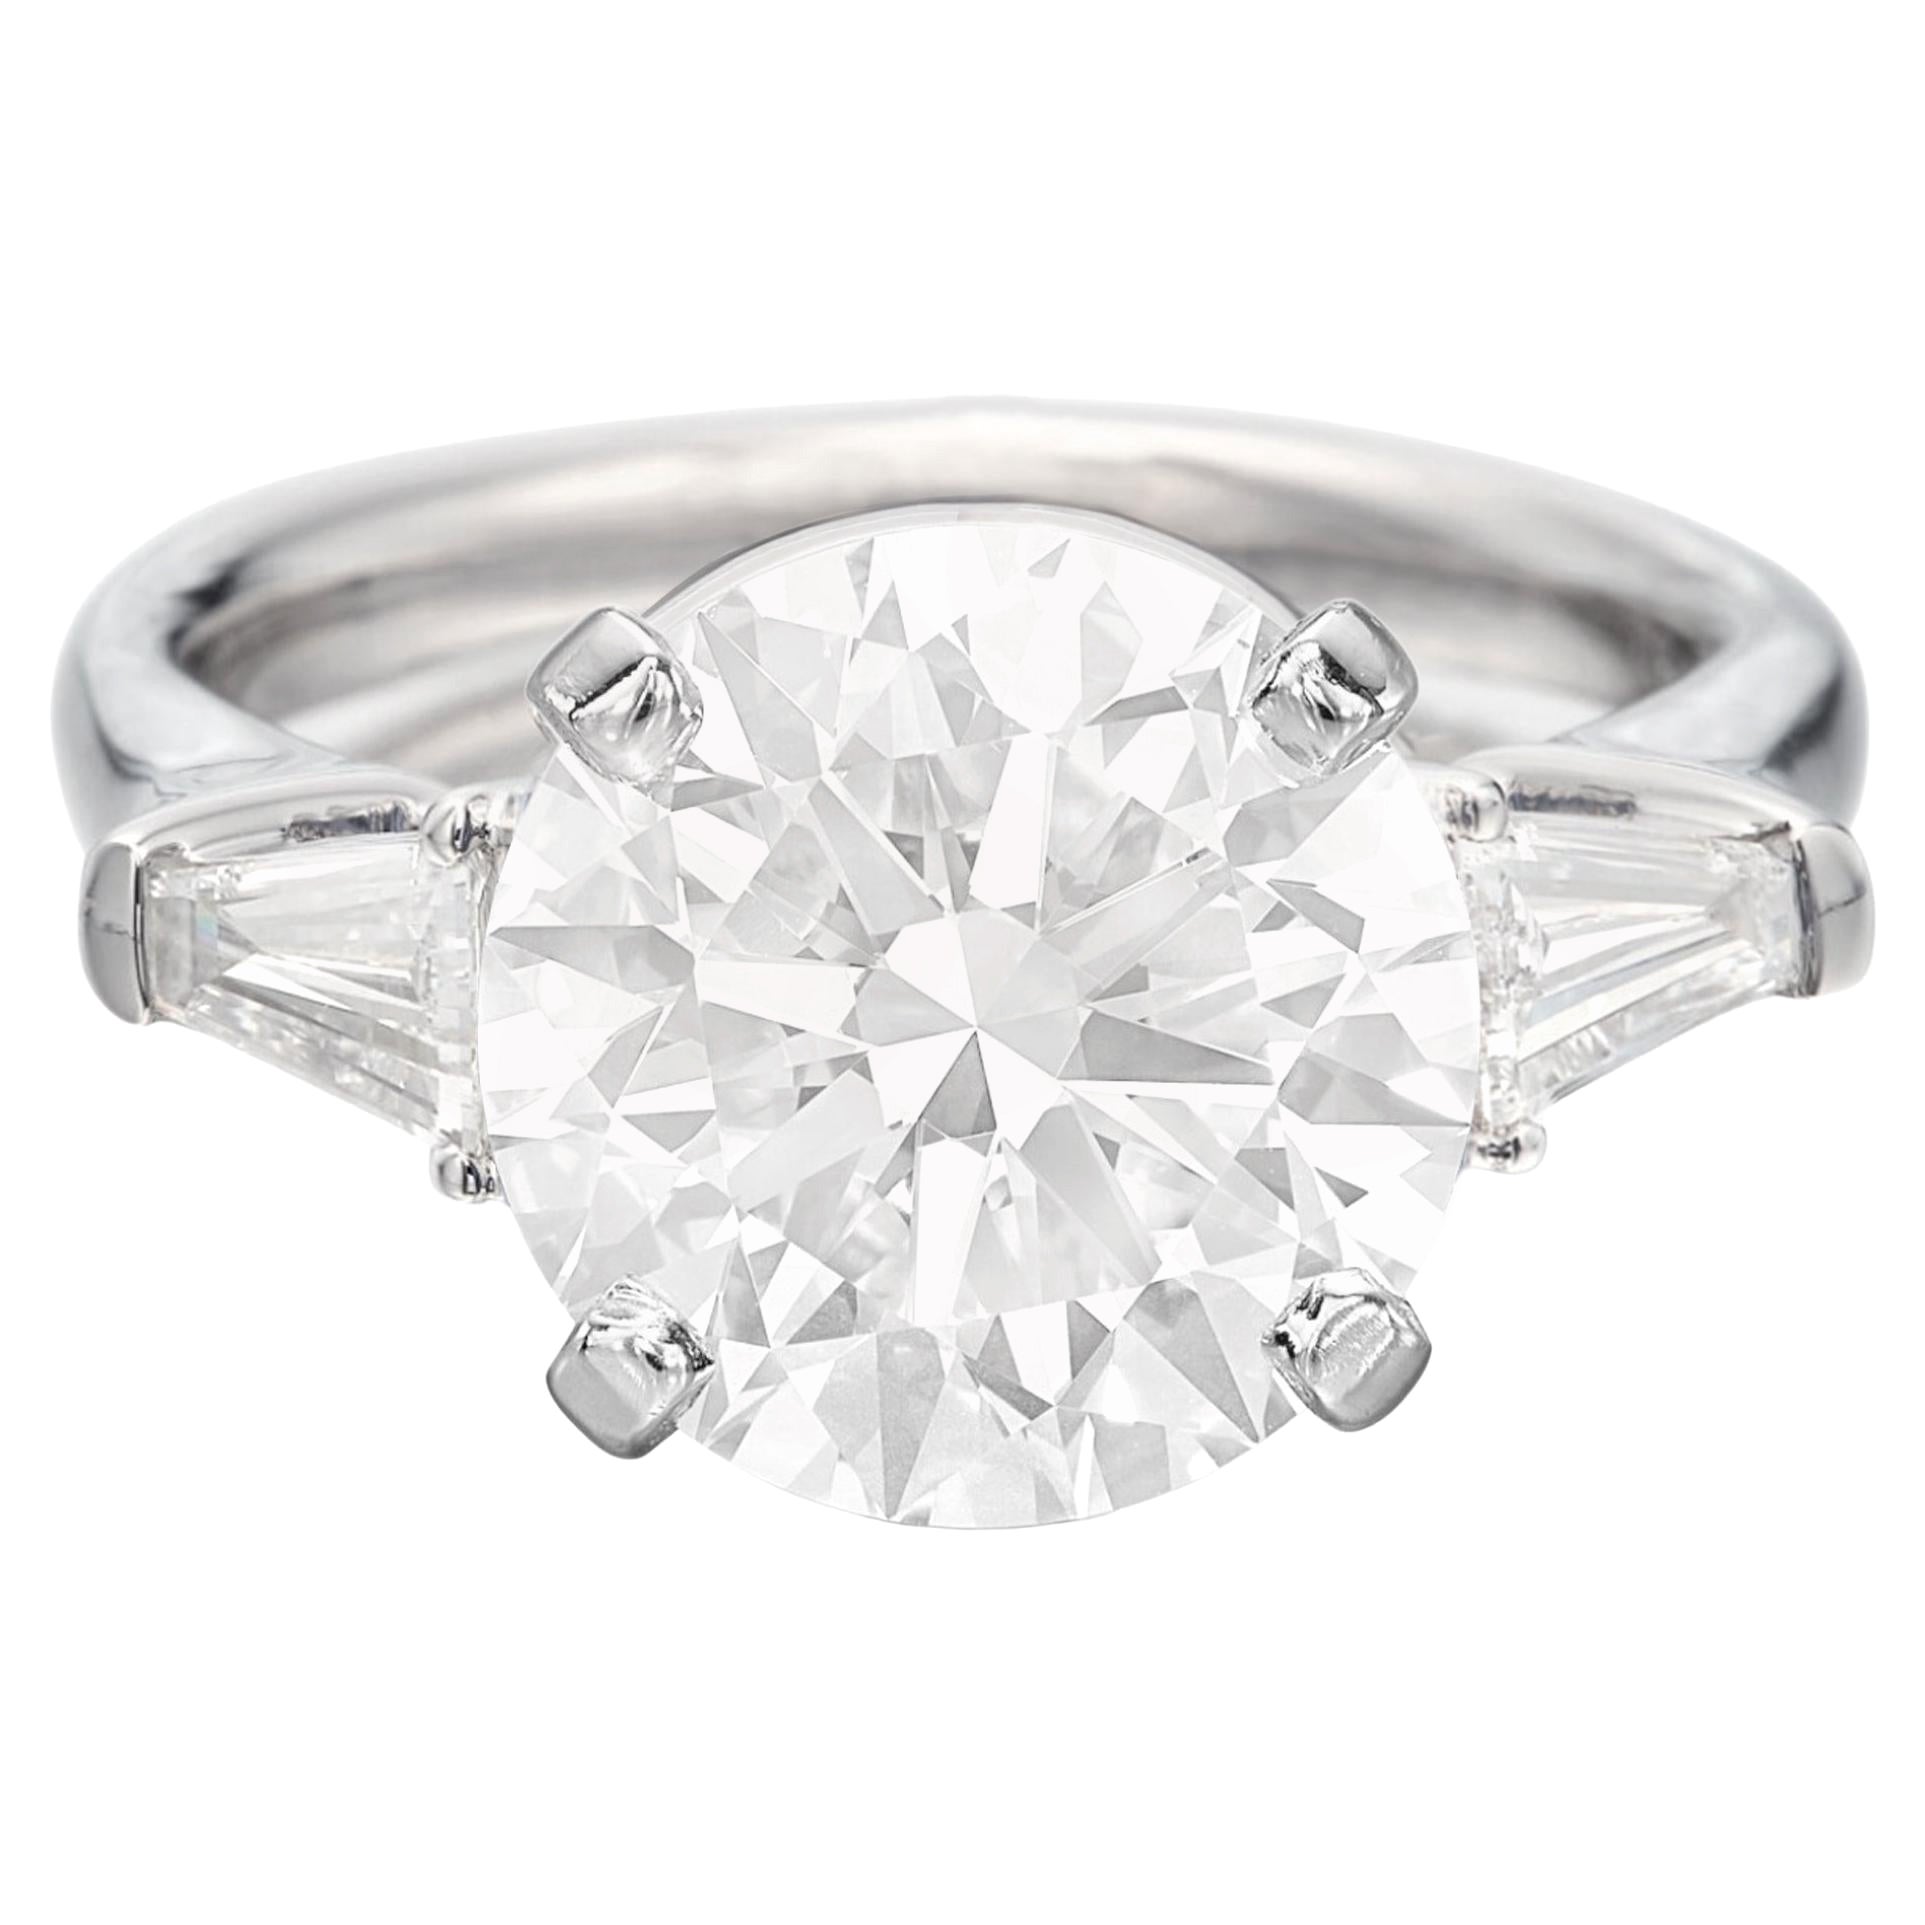 GIA Certifield 5 Carat Round Brilliant Cut Diamond Ring with tapered baguette For Sale